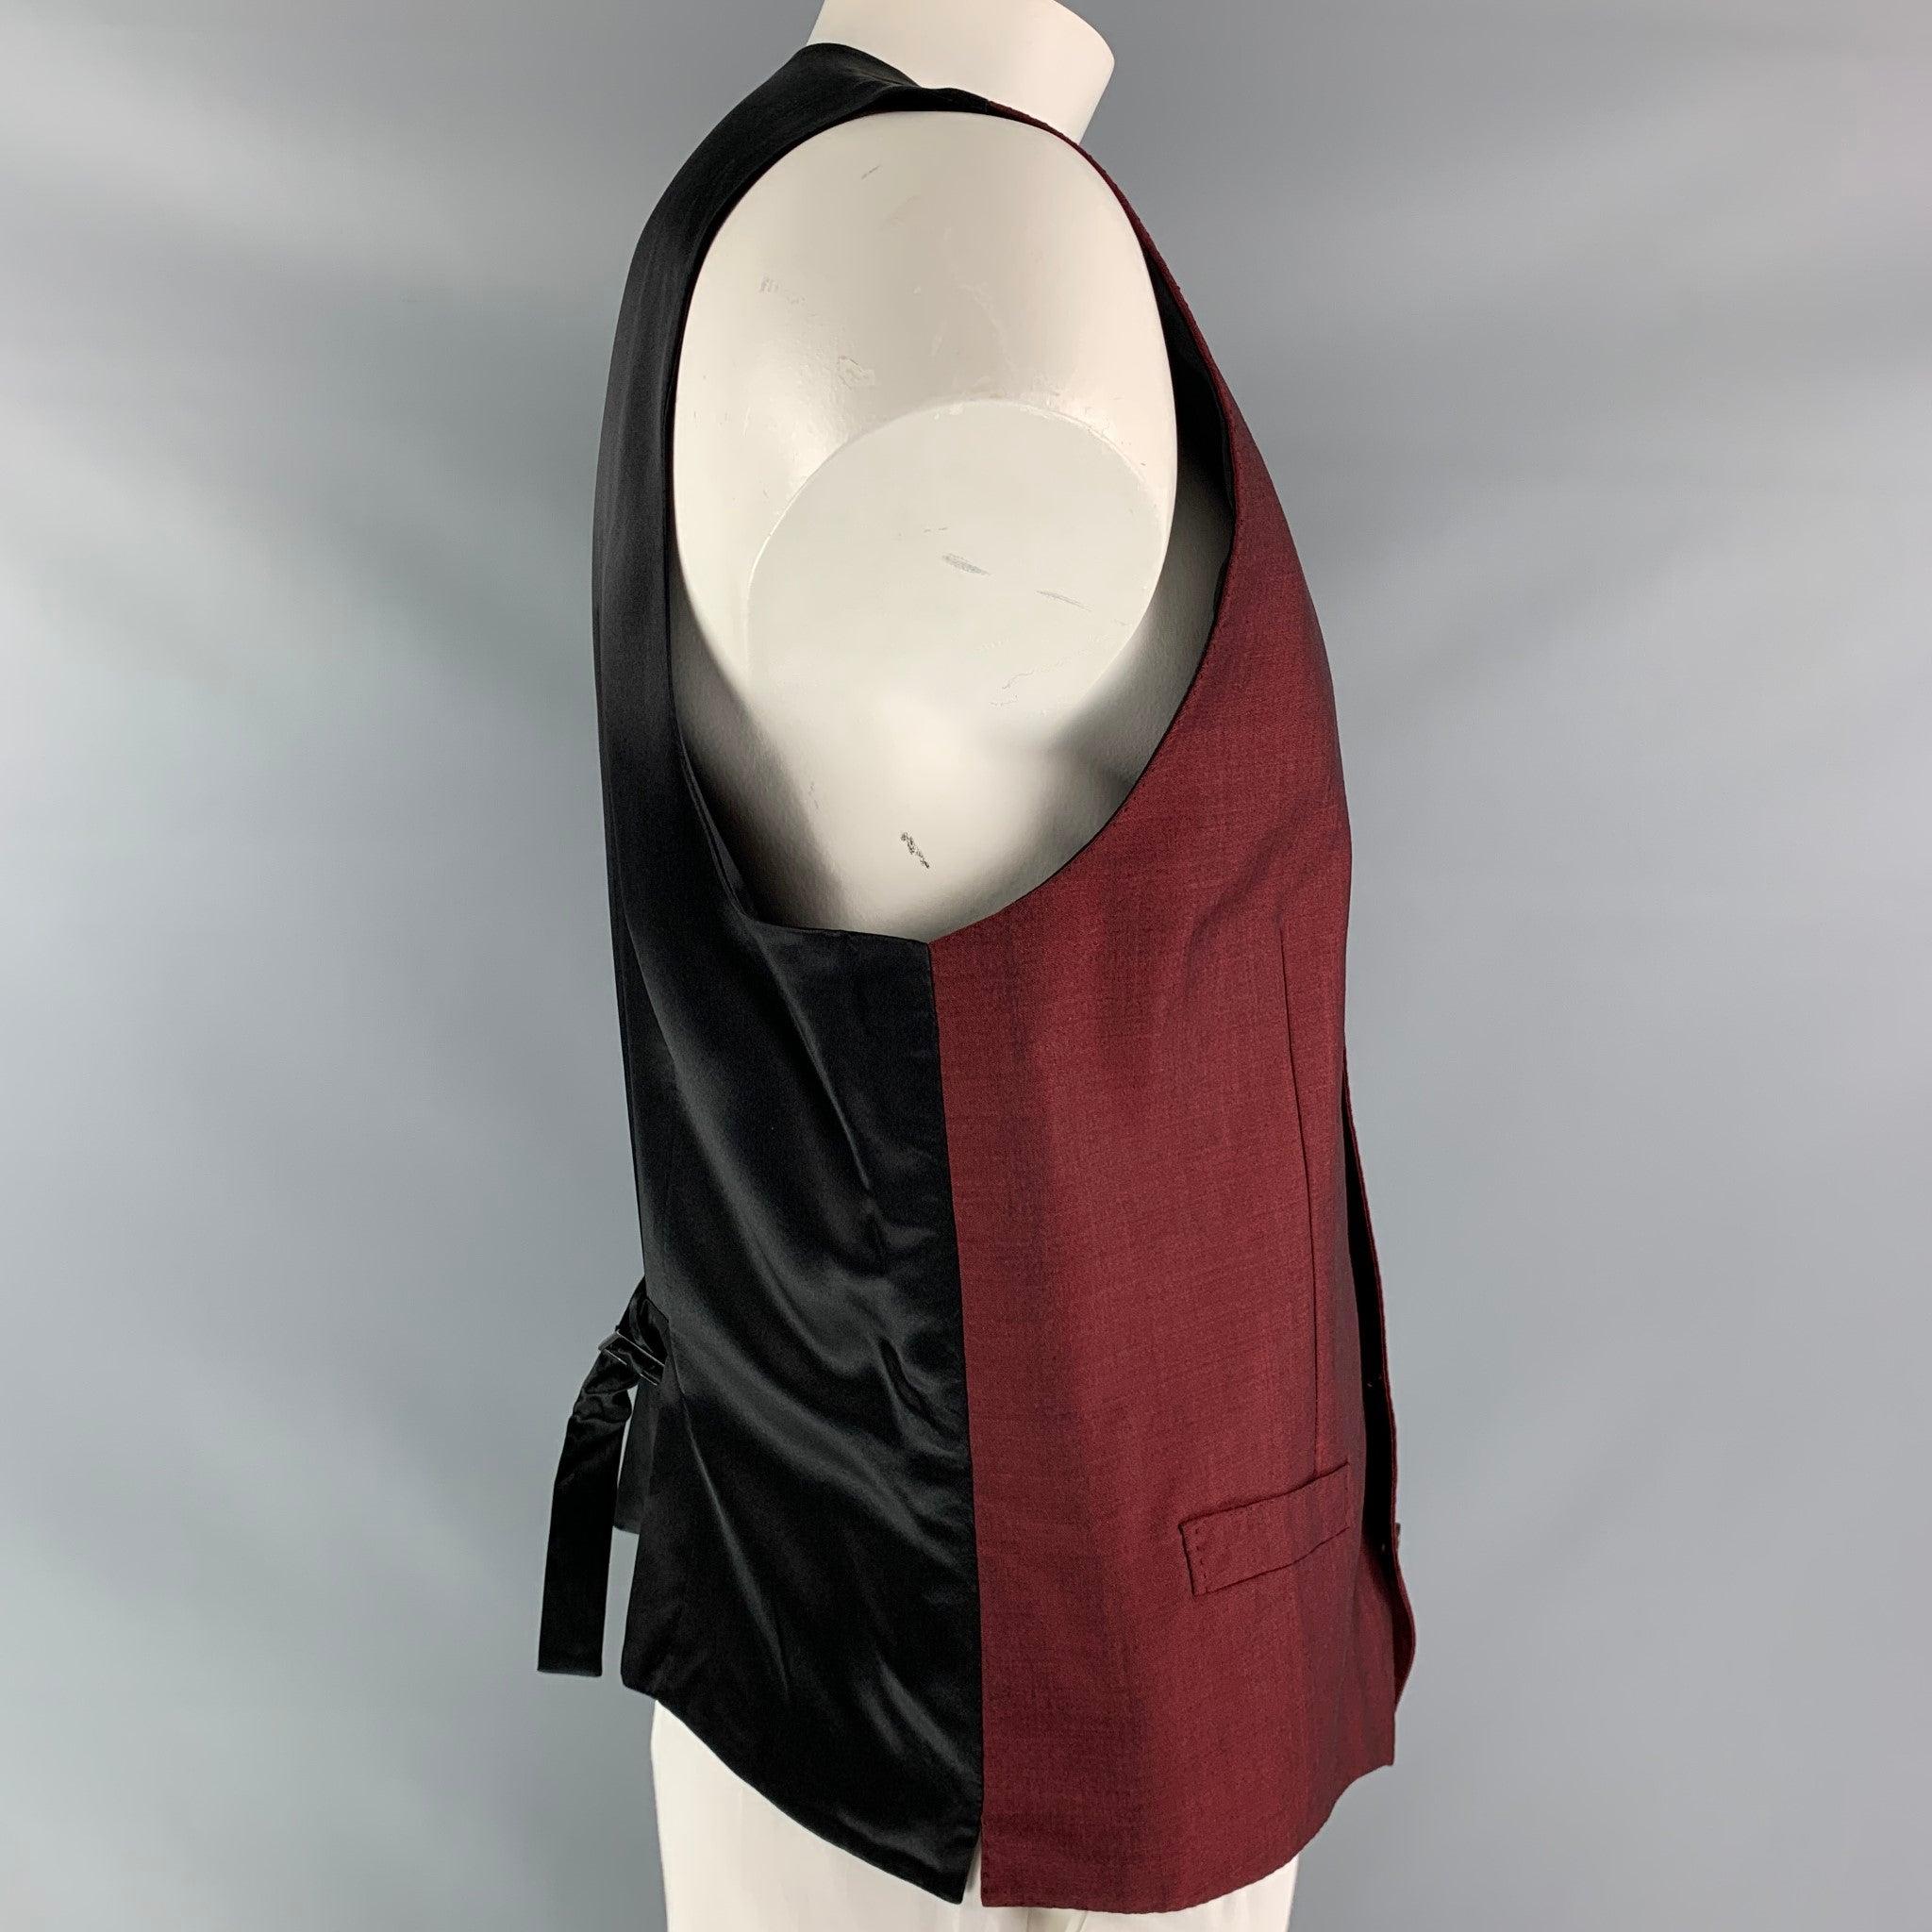 DOLCE & GABBANA alta sartoria dress vest comes in a burgundy wool, mohair and silk fabric, full lined featuring V- neck, welt pockets, five buttons down closure, black silk satin fabric at back and adjustable belt. Made in Italy.Excellent Pre-Owned